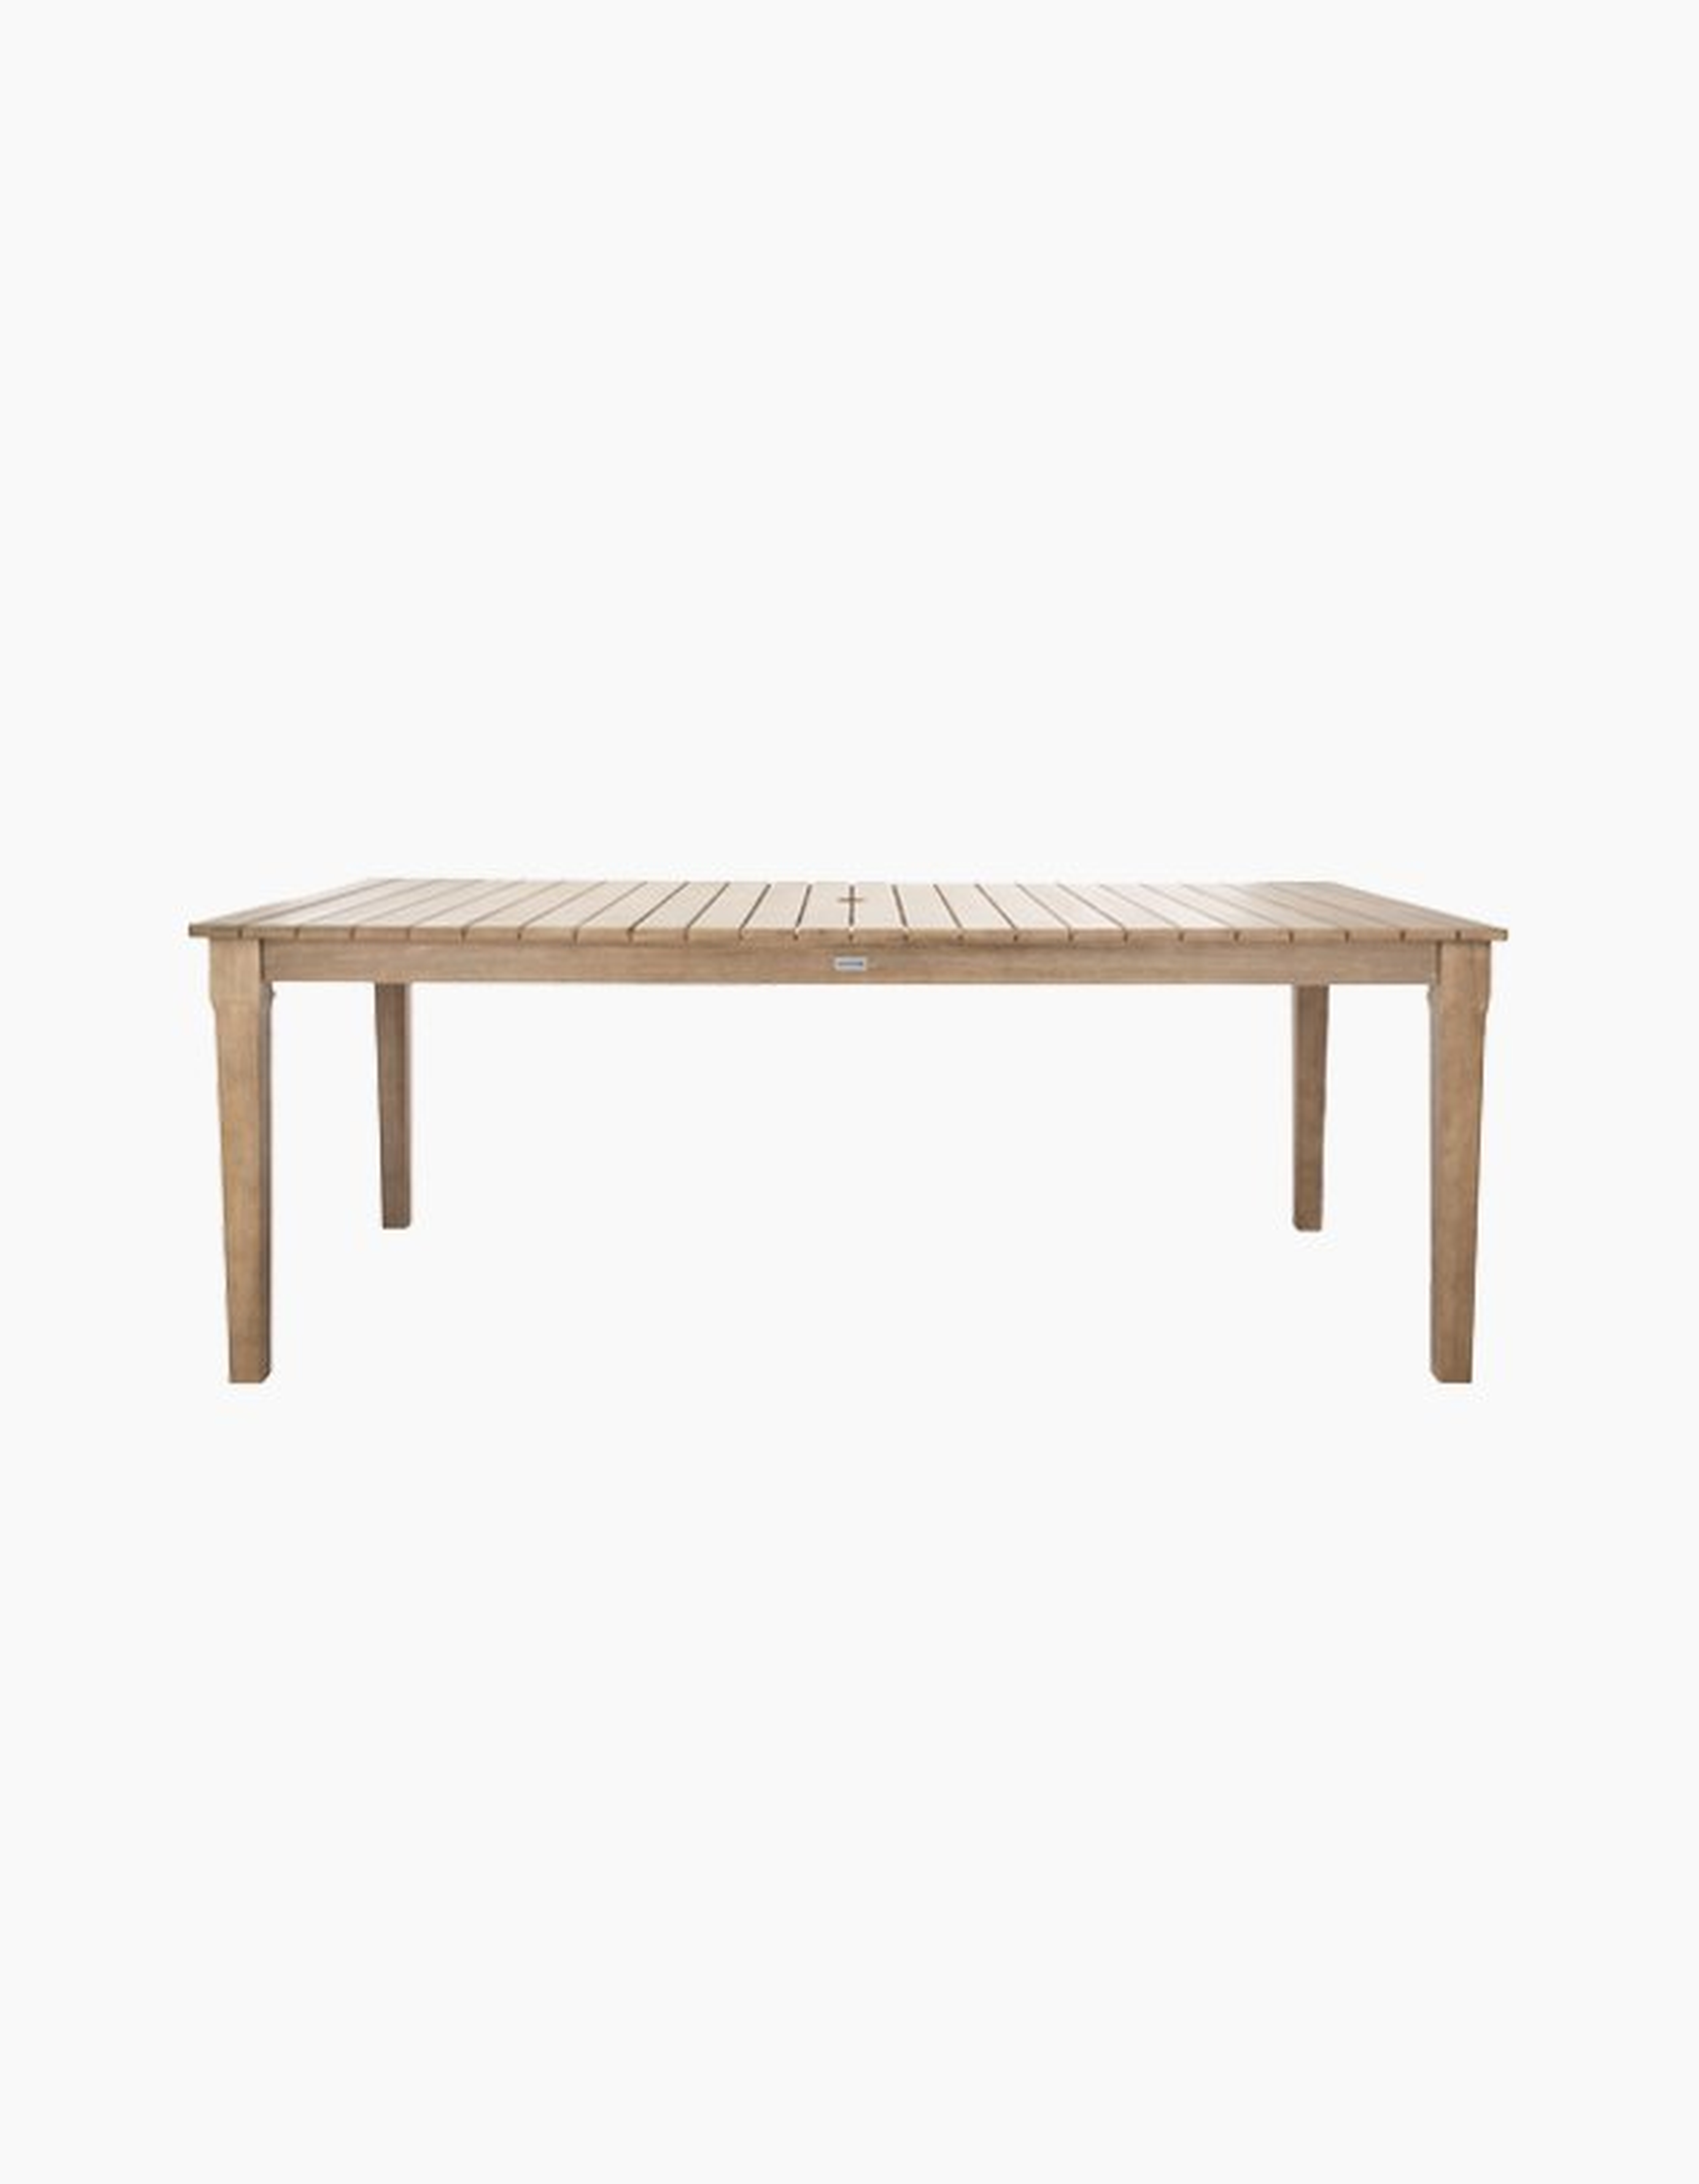 Dominica Wooden Outdoor Dining Table - Natural - Arlo Home - Arlo Home